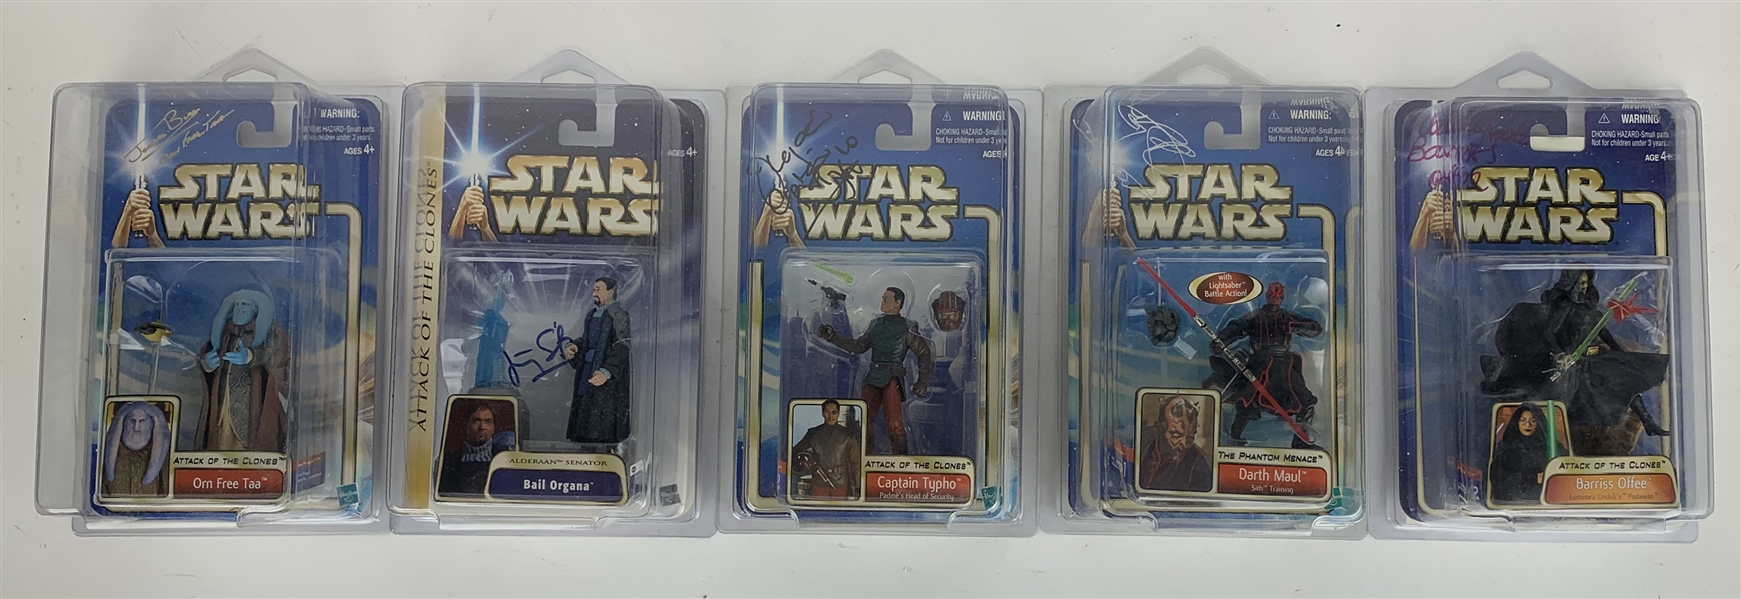 Lot of Five (5) Signed Star Wars Figurines w/ Darth Maul, Typho & Others! (Beckett/BAS Guaranteed)